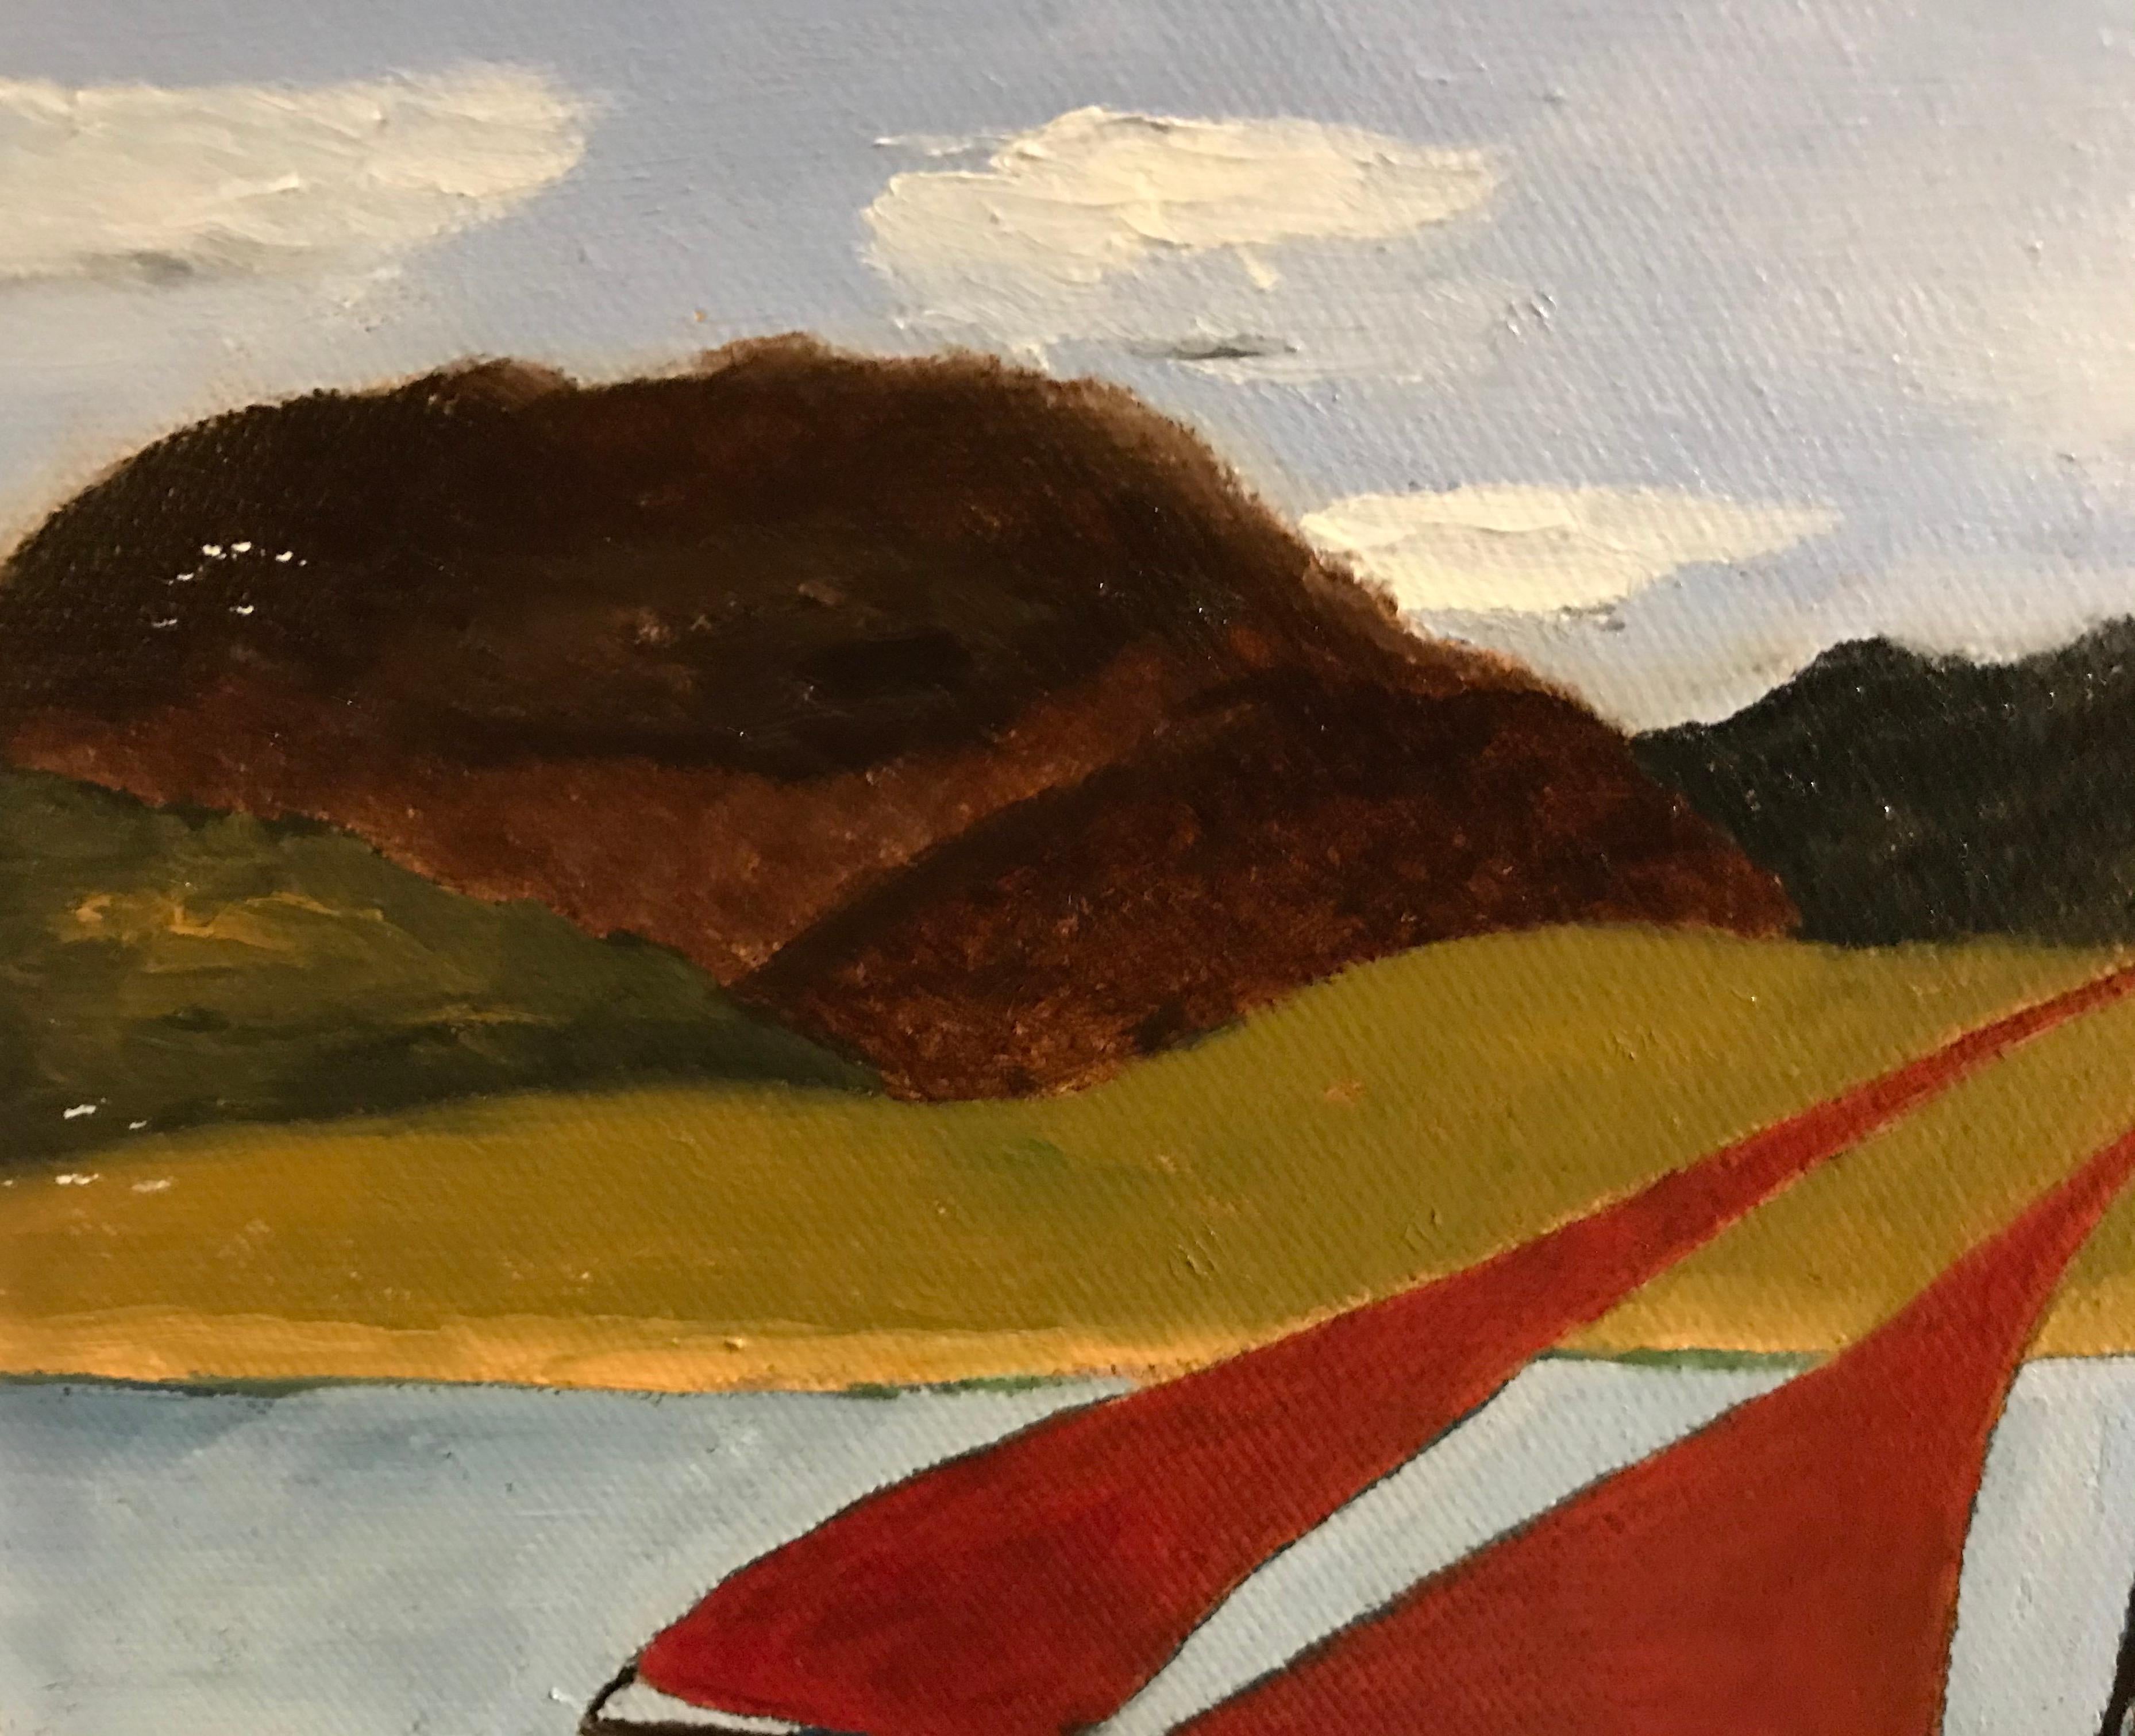 This oil on canvas painting is of a boat ride in the Connemara, a traditional and naturalistic area in the West of Ireland. The boat presents itself gliding on the reflective water as the countryside passes by. The color scheme is very light and is